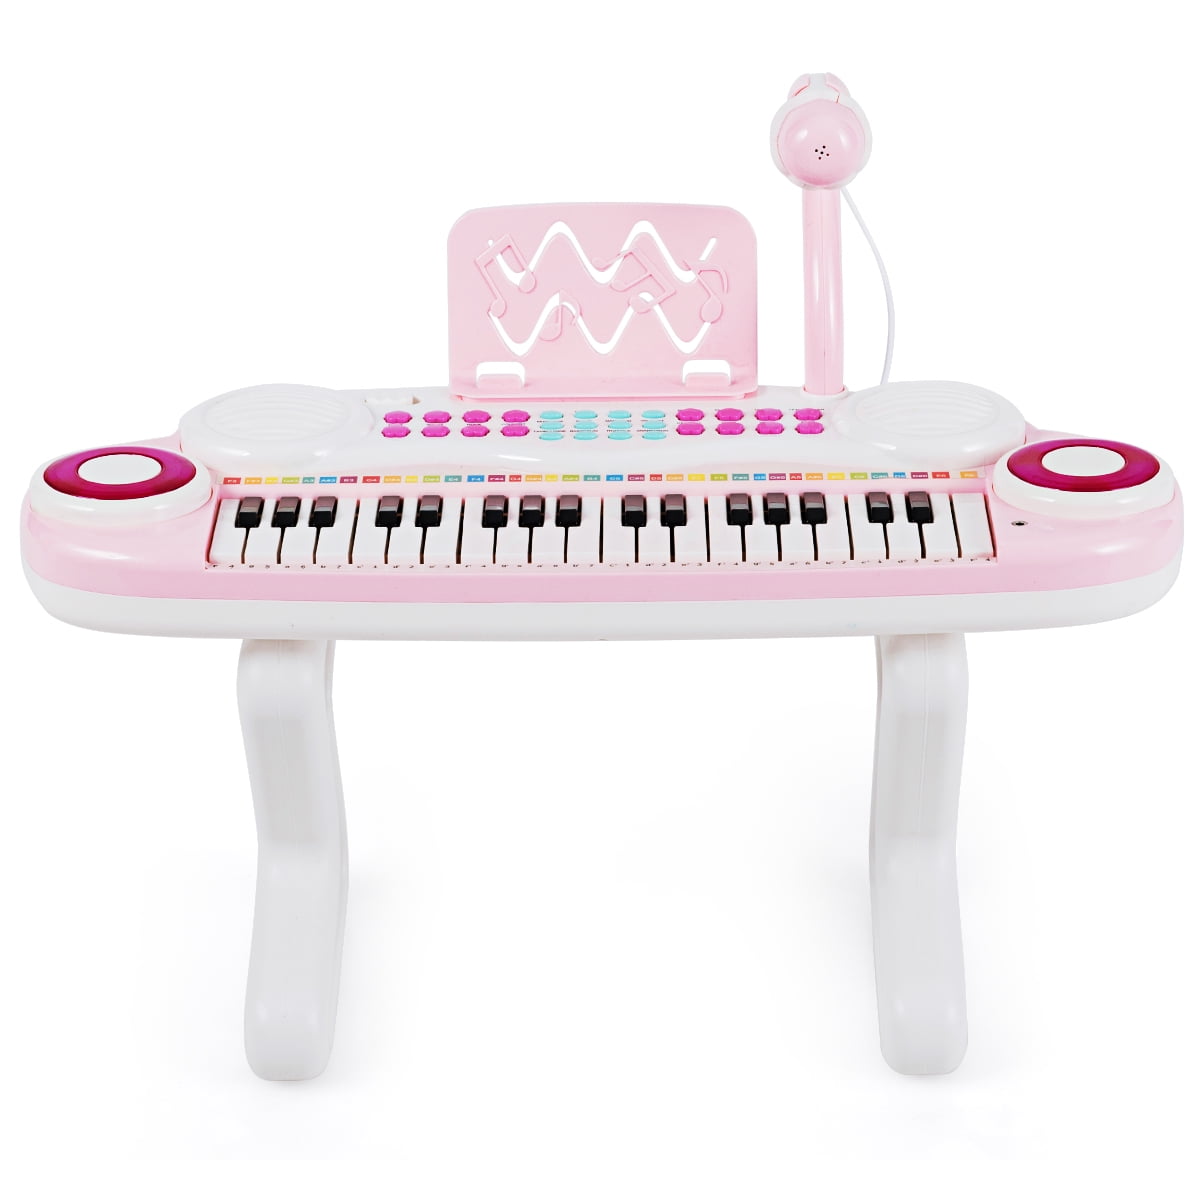 37-Key Toy Keyboard Piano Electronic Musical Instrument with Microphone Pink 